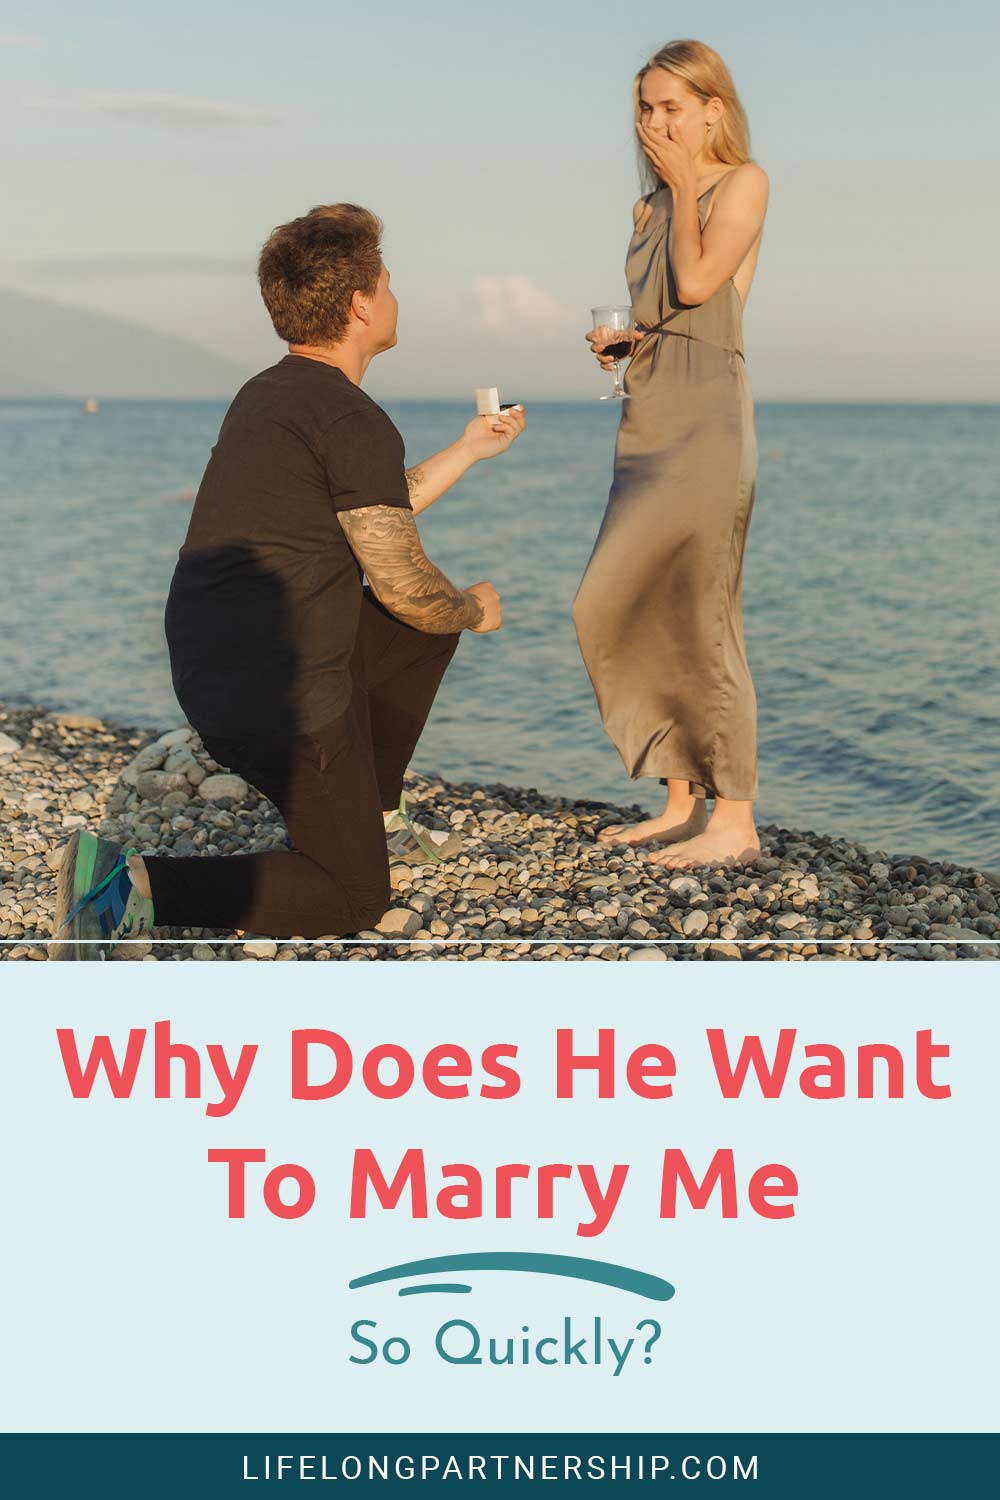 Man proposing at a beach - Why Does He Want To Marry Me So Quickly?